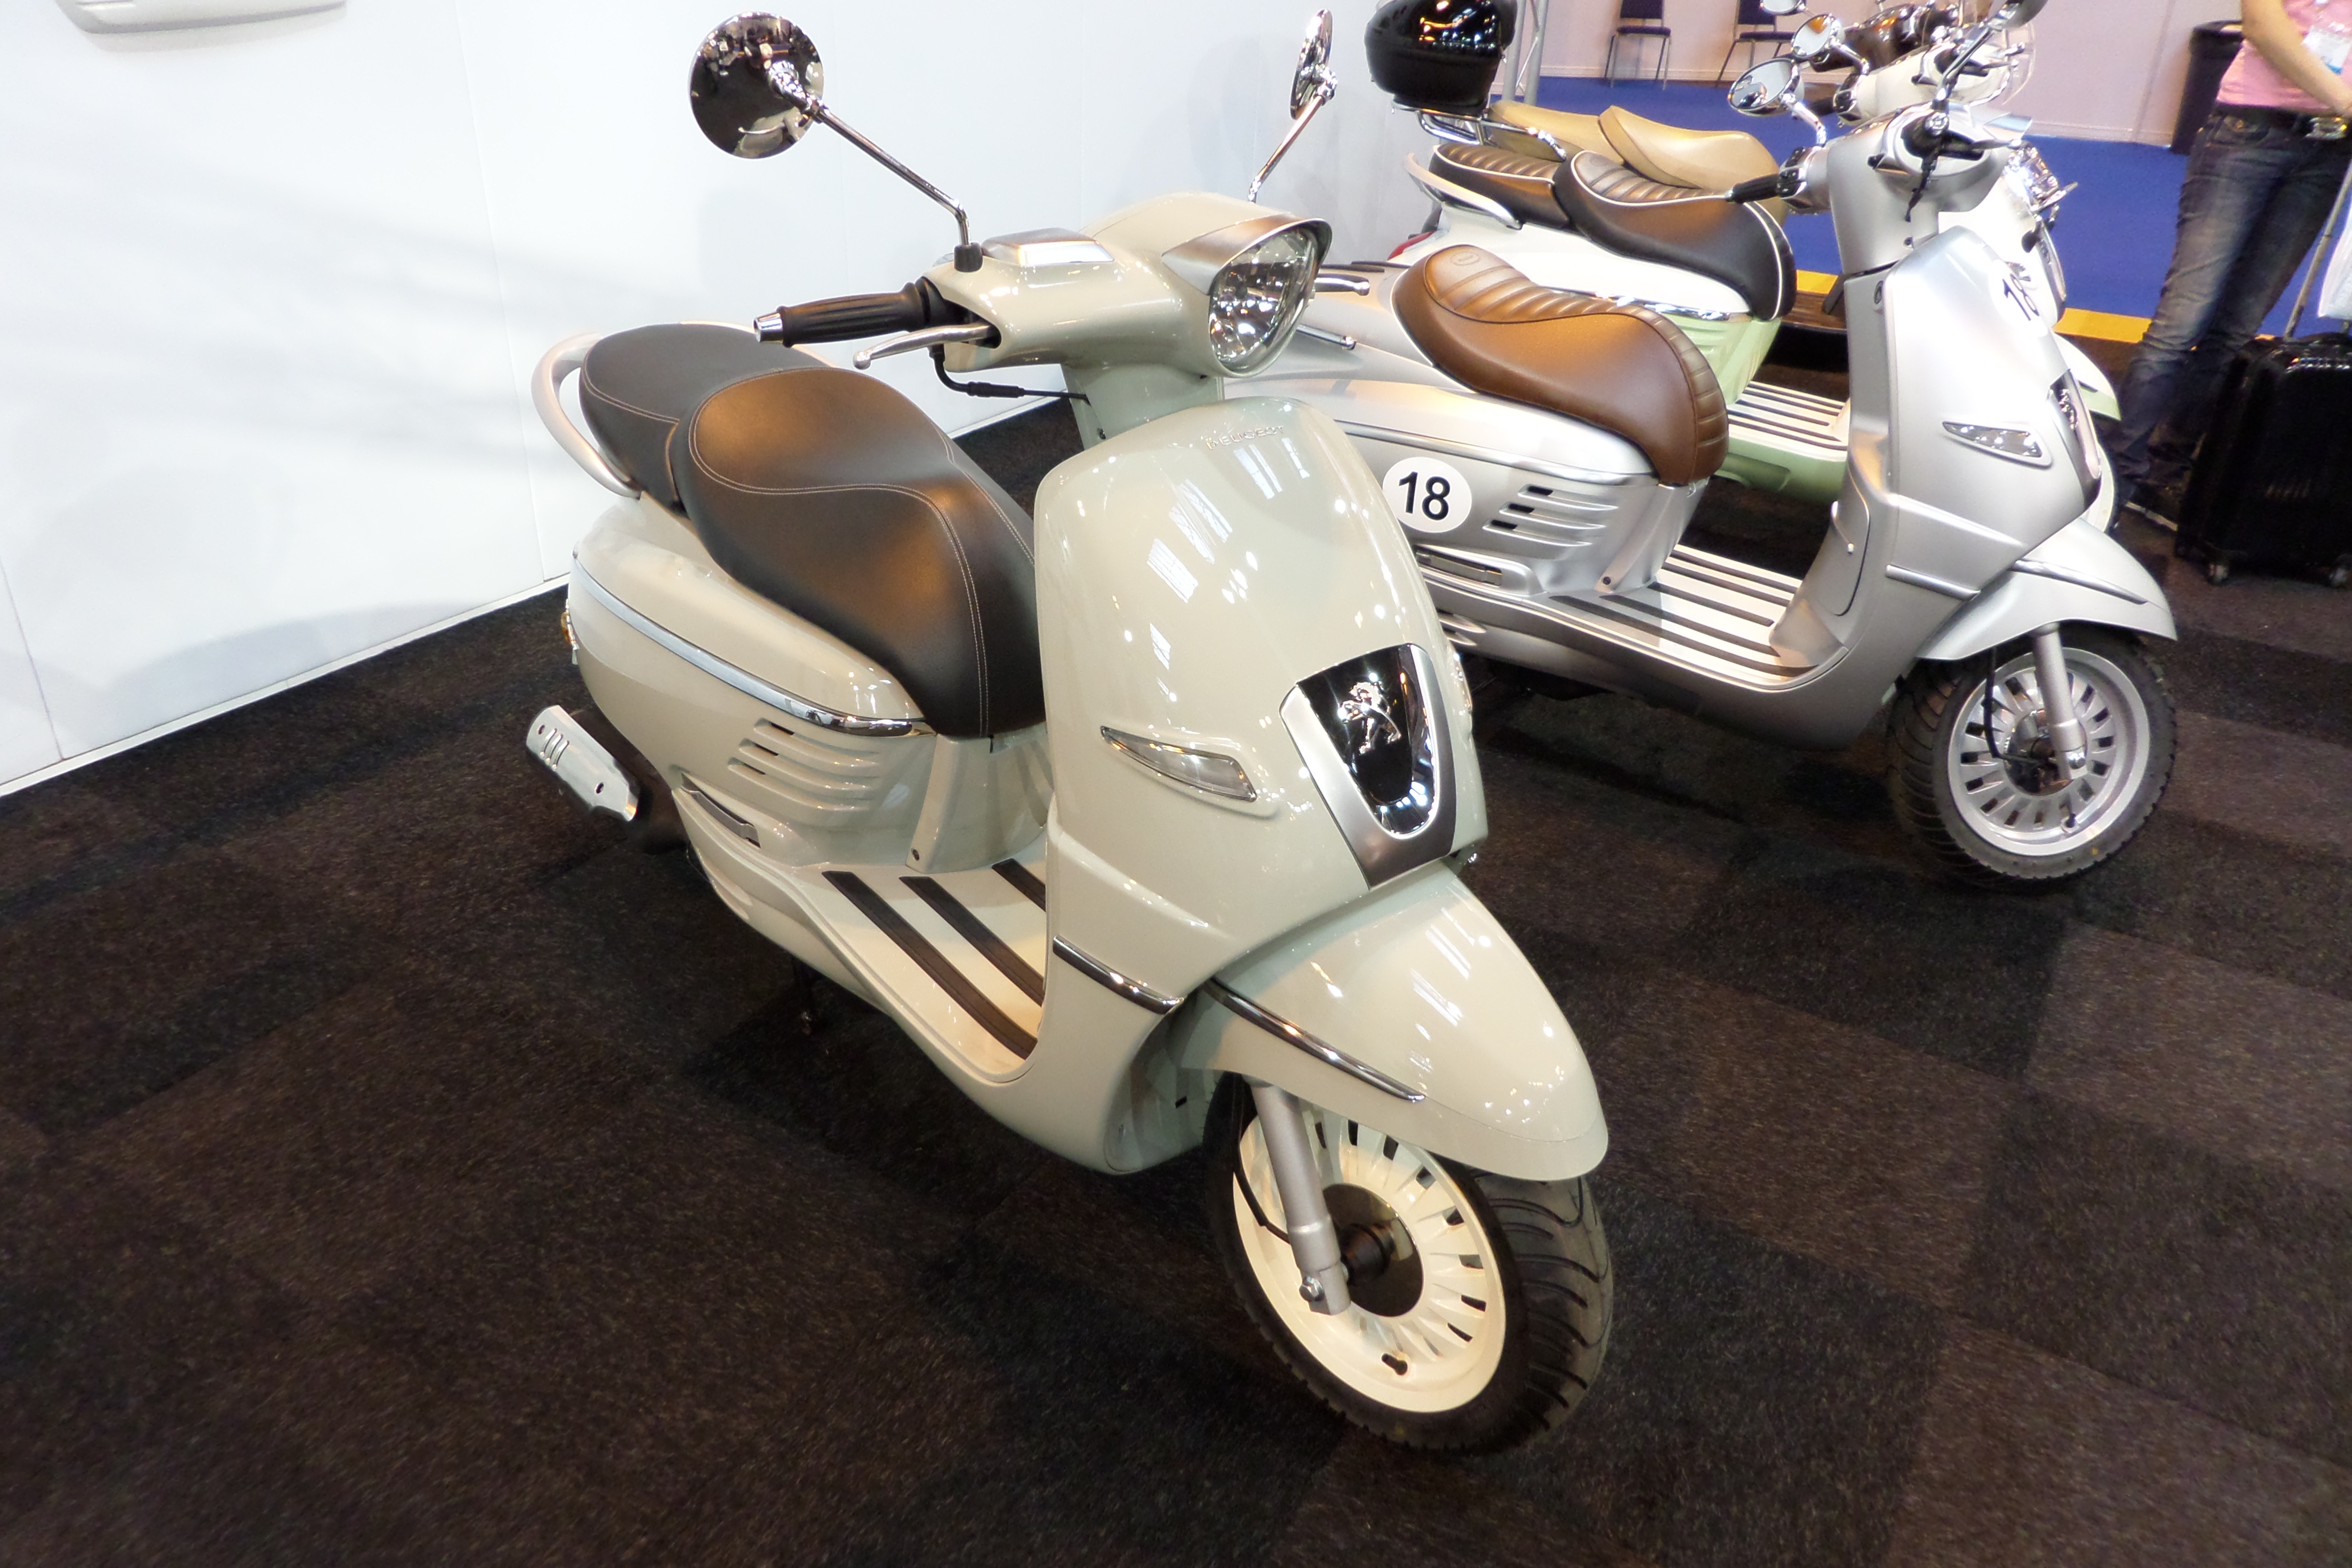 New: Peugeot Django retro scooters, available this summer